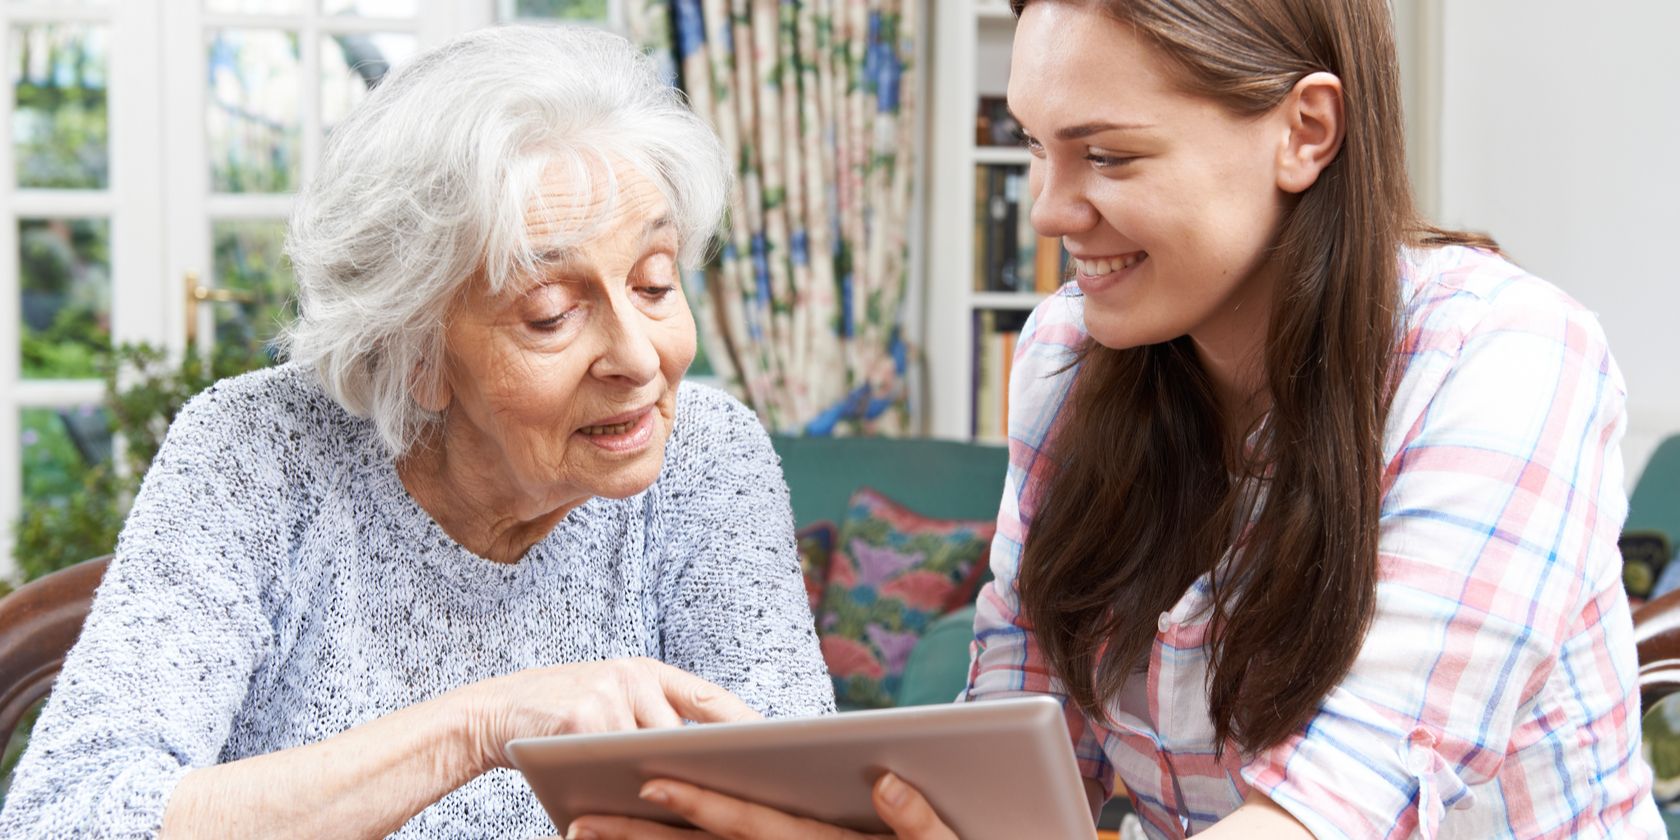 young woman showing older woman a tablet